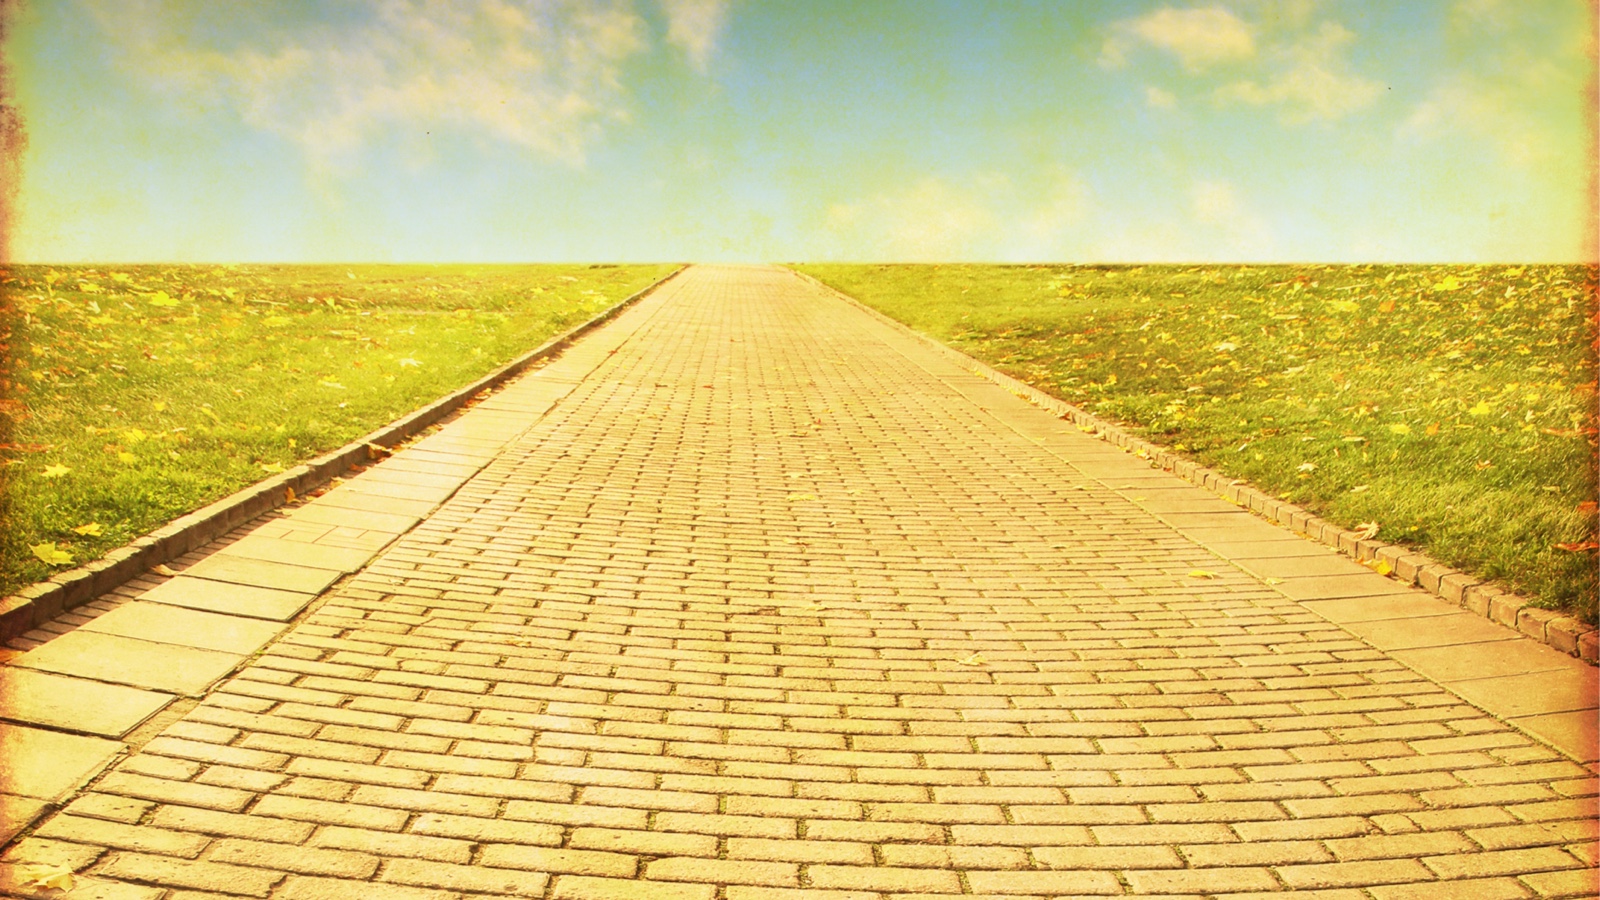 Effective Use of Technologies in Student Advising: Is There a Yellow Brick Road?